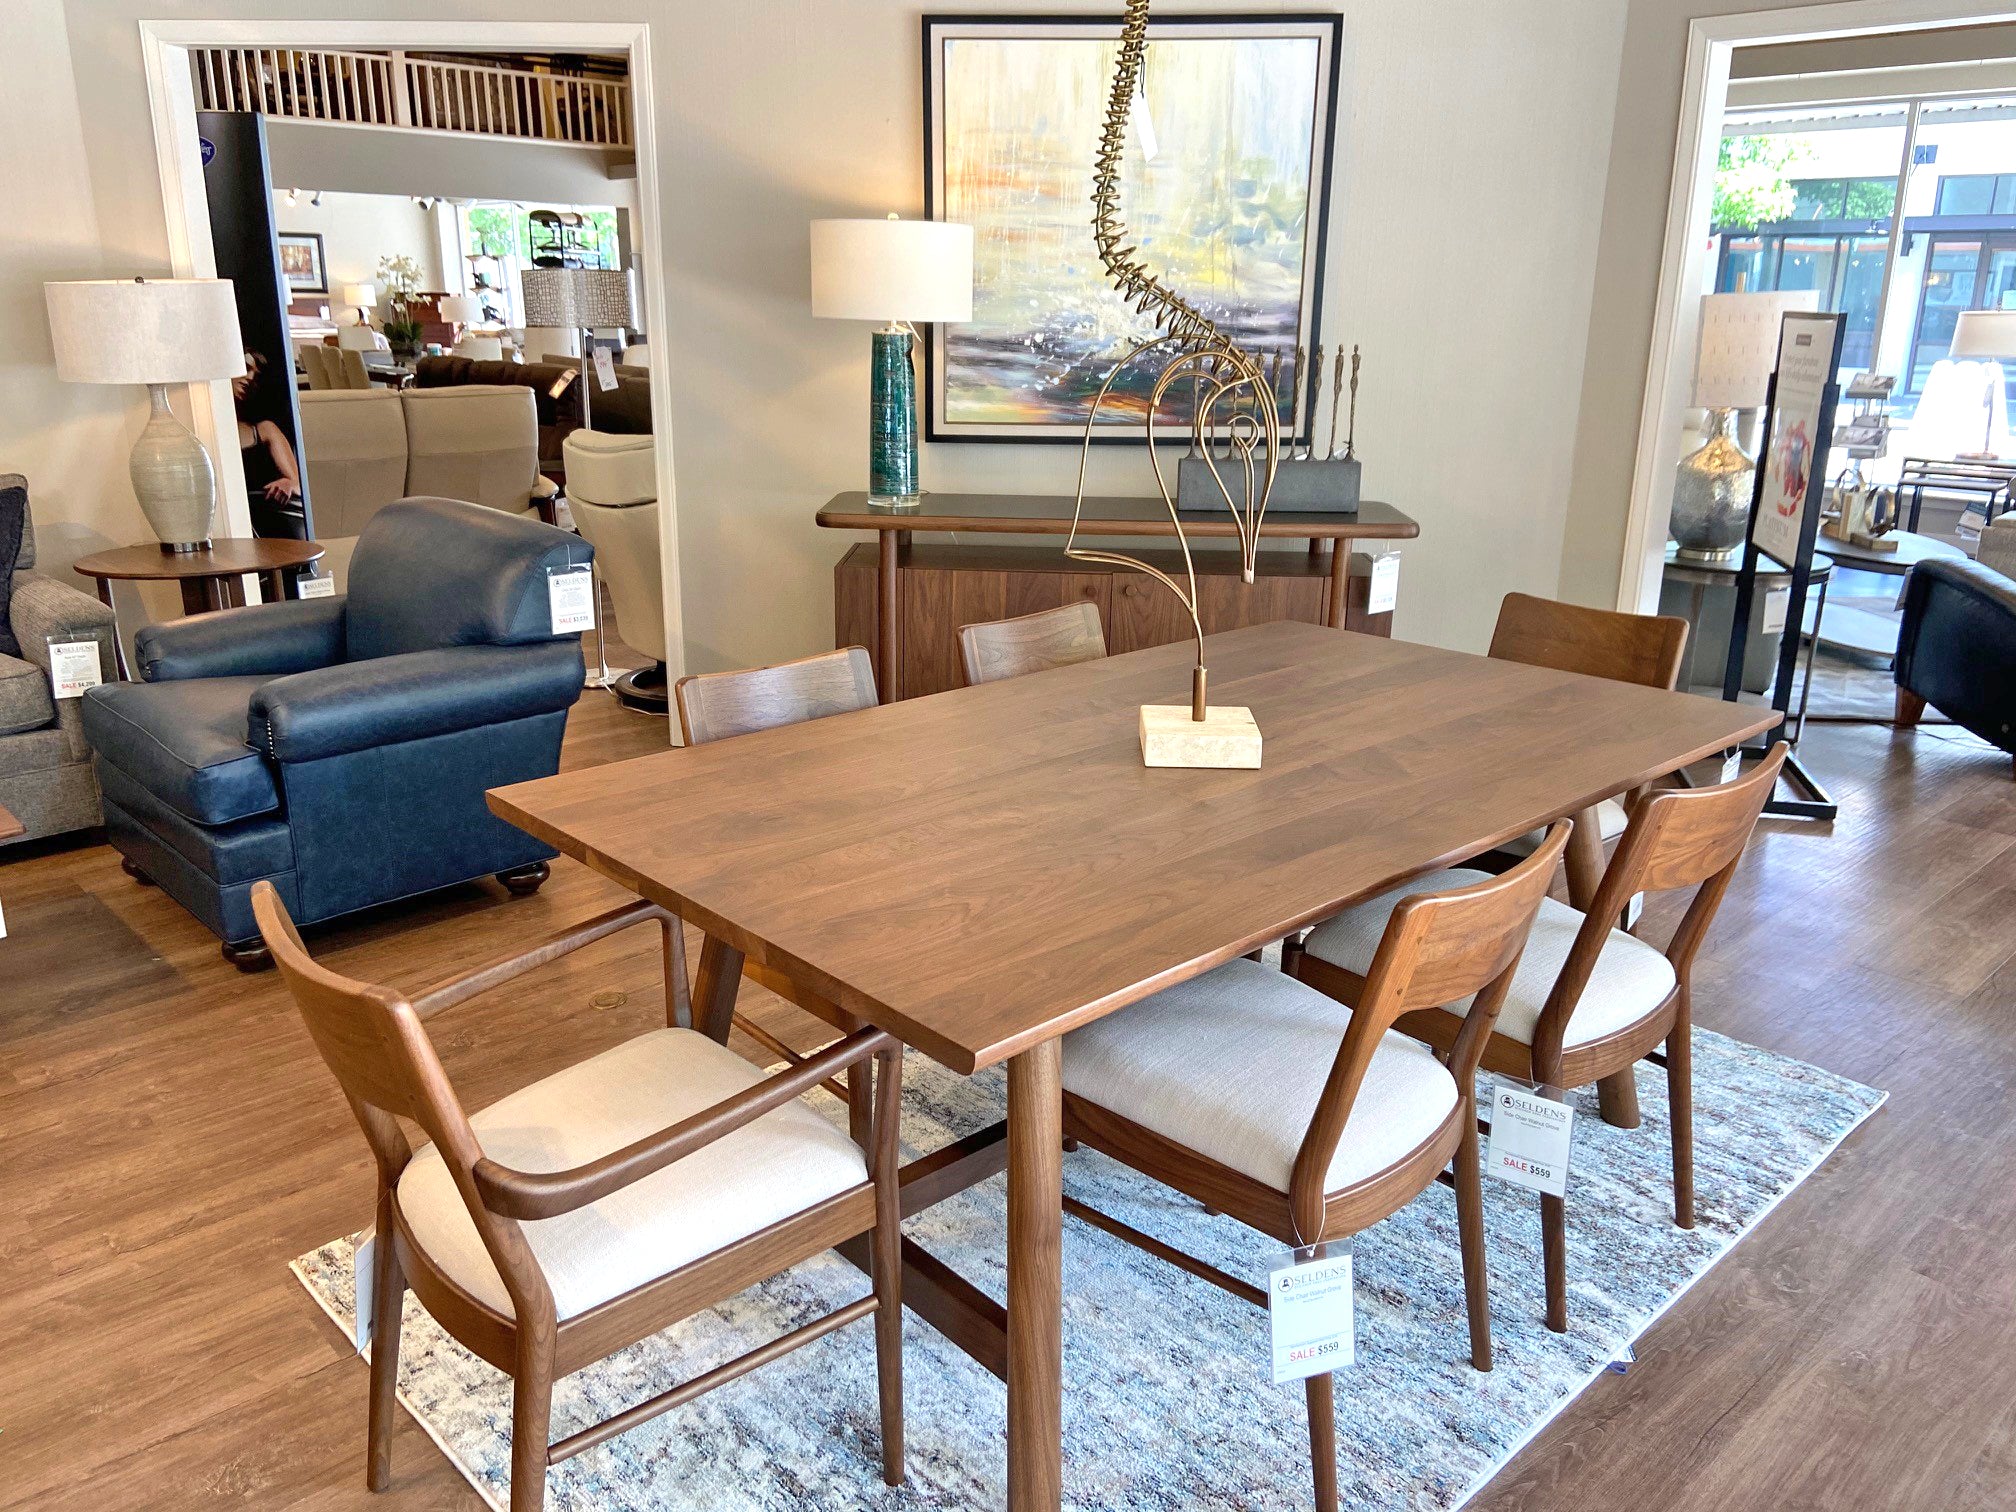 A dining room setup in the Seldens furniture showroom in Olympia, Washington.